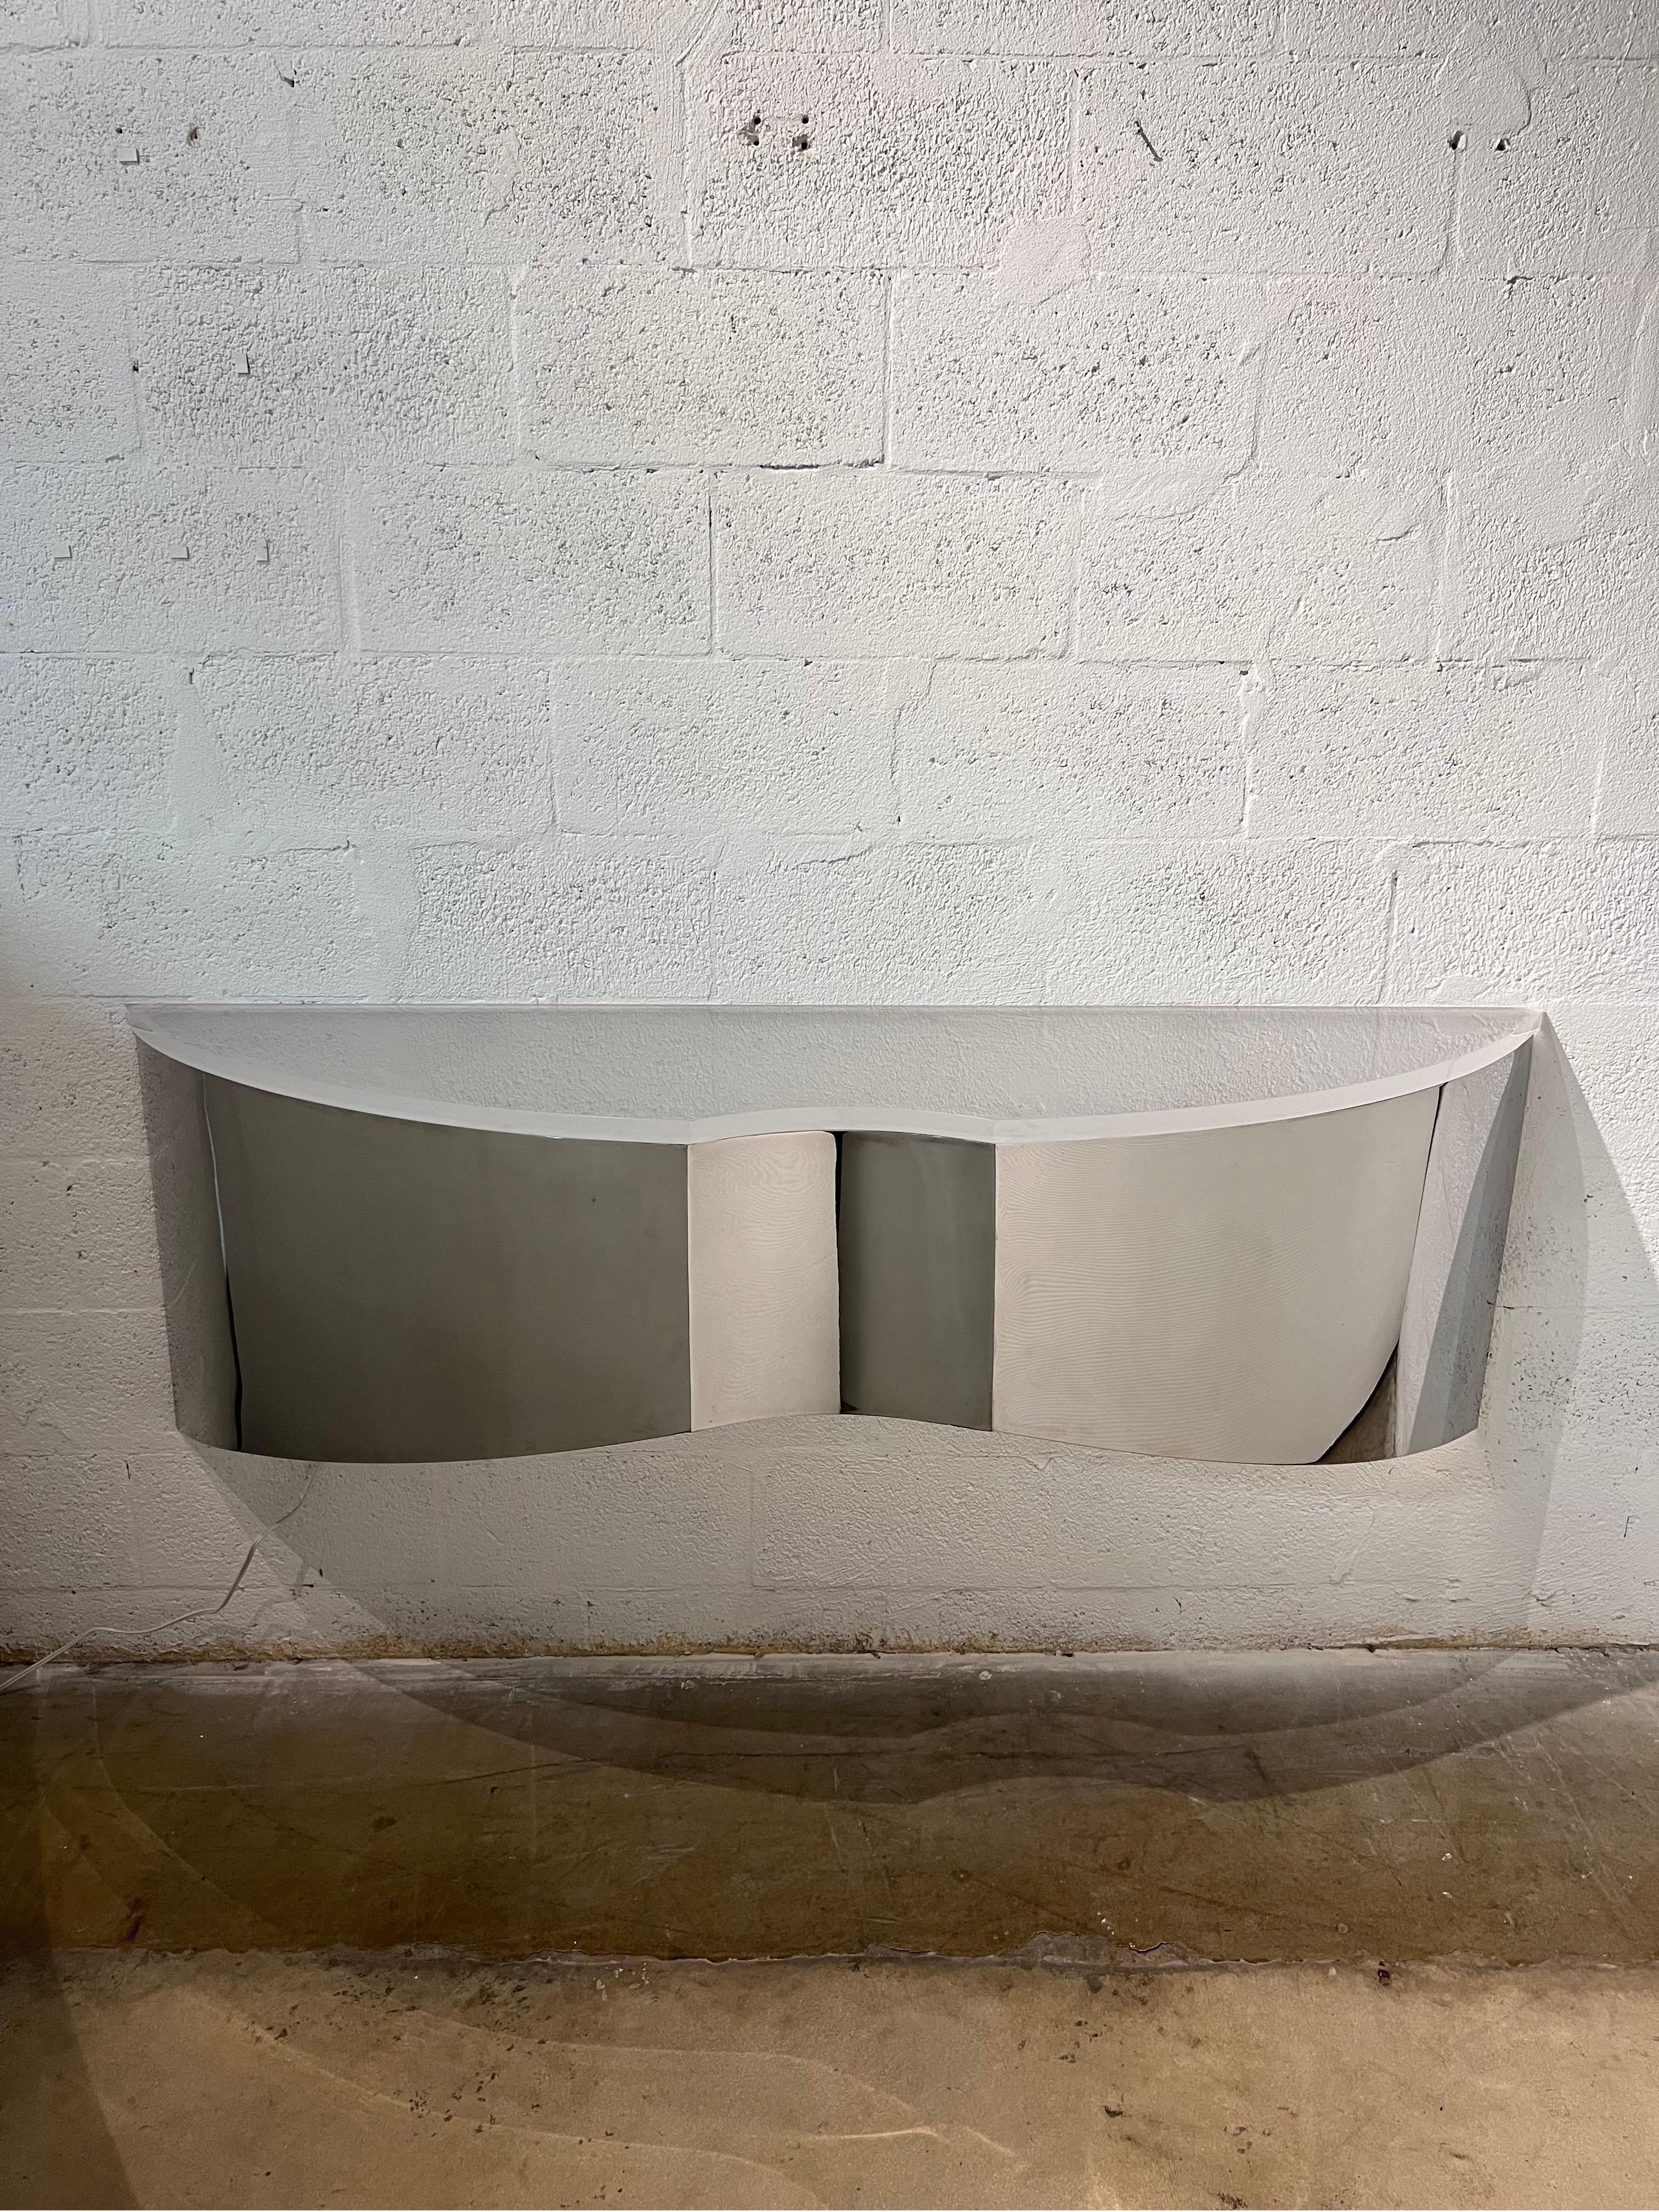 Custom polished steel floating wall console or shelf with frosted lucite top circa 1970s.  A welded steel bracket on the interior holds a new LED tube lamp that can be hardwired or plugged into a wall socket.  